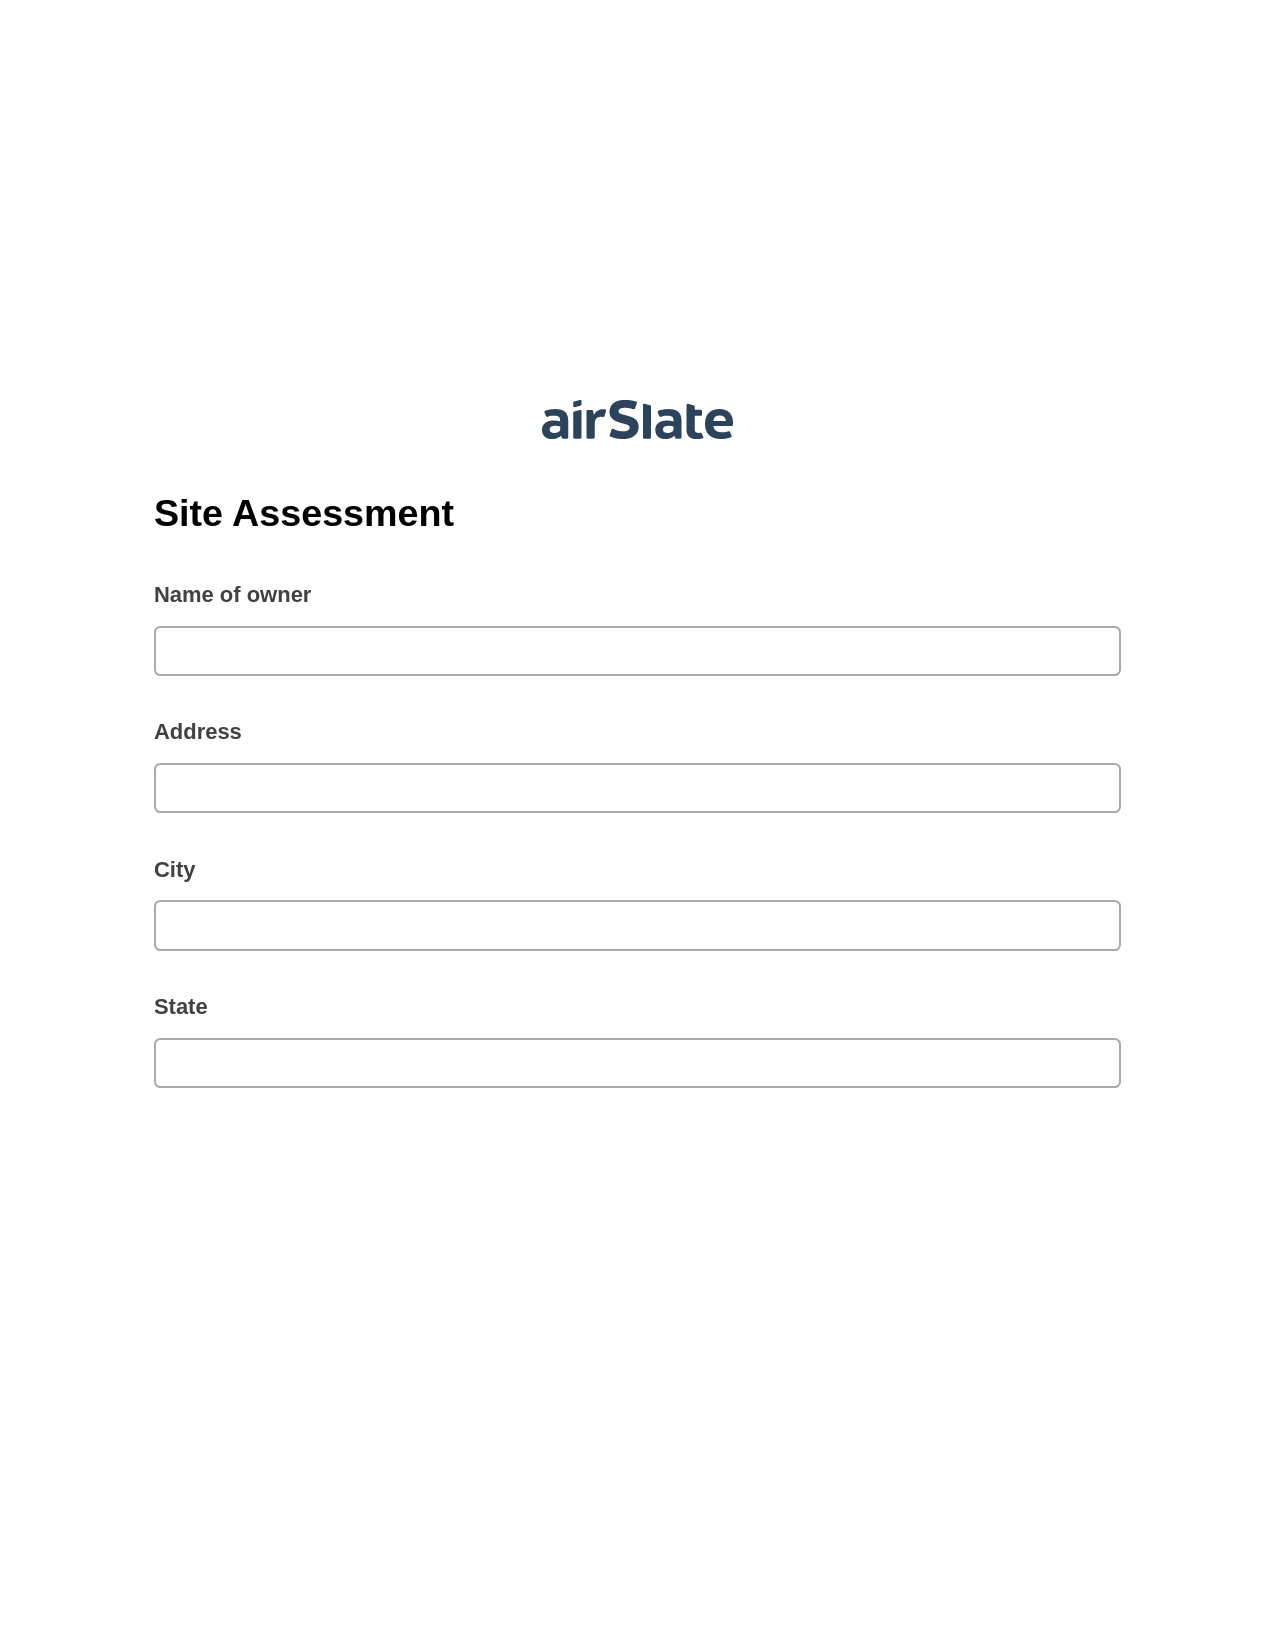 Site Assessment Pre-fill Slate from MS Dynamics 365 Records Bot, Create Salesforce Record Bot, Export to Excel 365 Bot